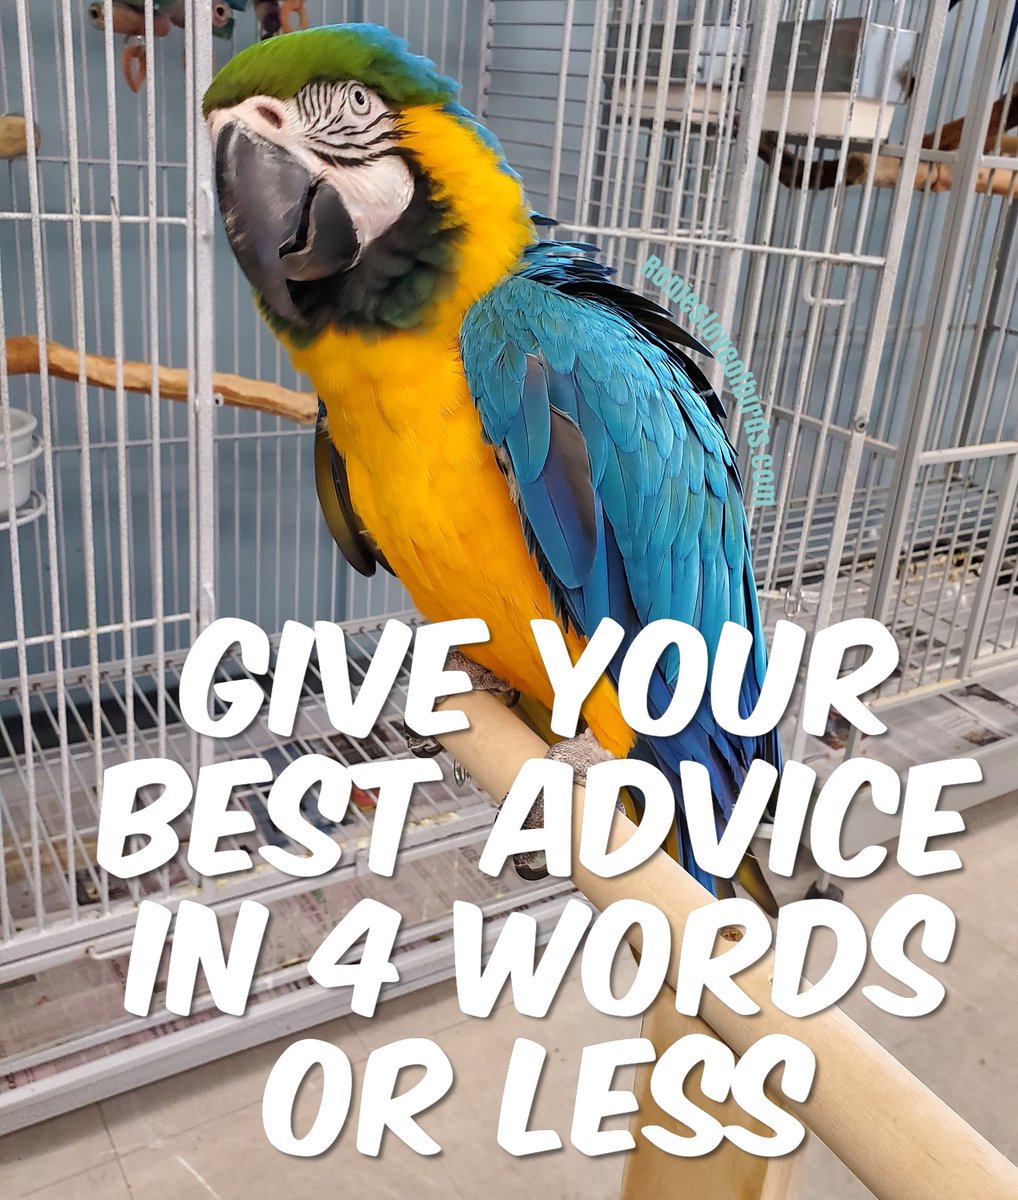 We have a lot of first time parrot paronts asking us for help and advice. We want to hear from you. What advice would you give to a first time birder, in 4 words or less? 
#RoniesLoveofBirds #RoniesAdoptions #blueandgoldmacaw